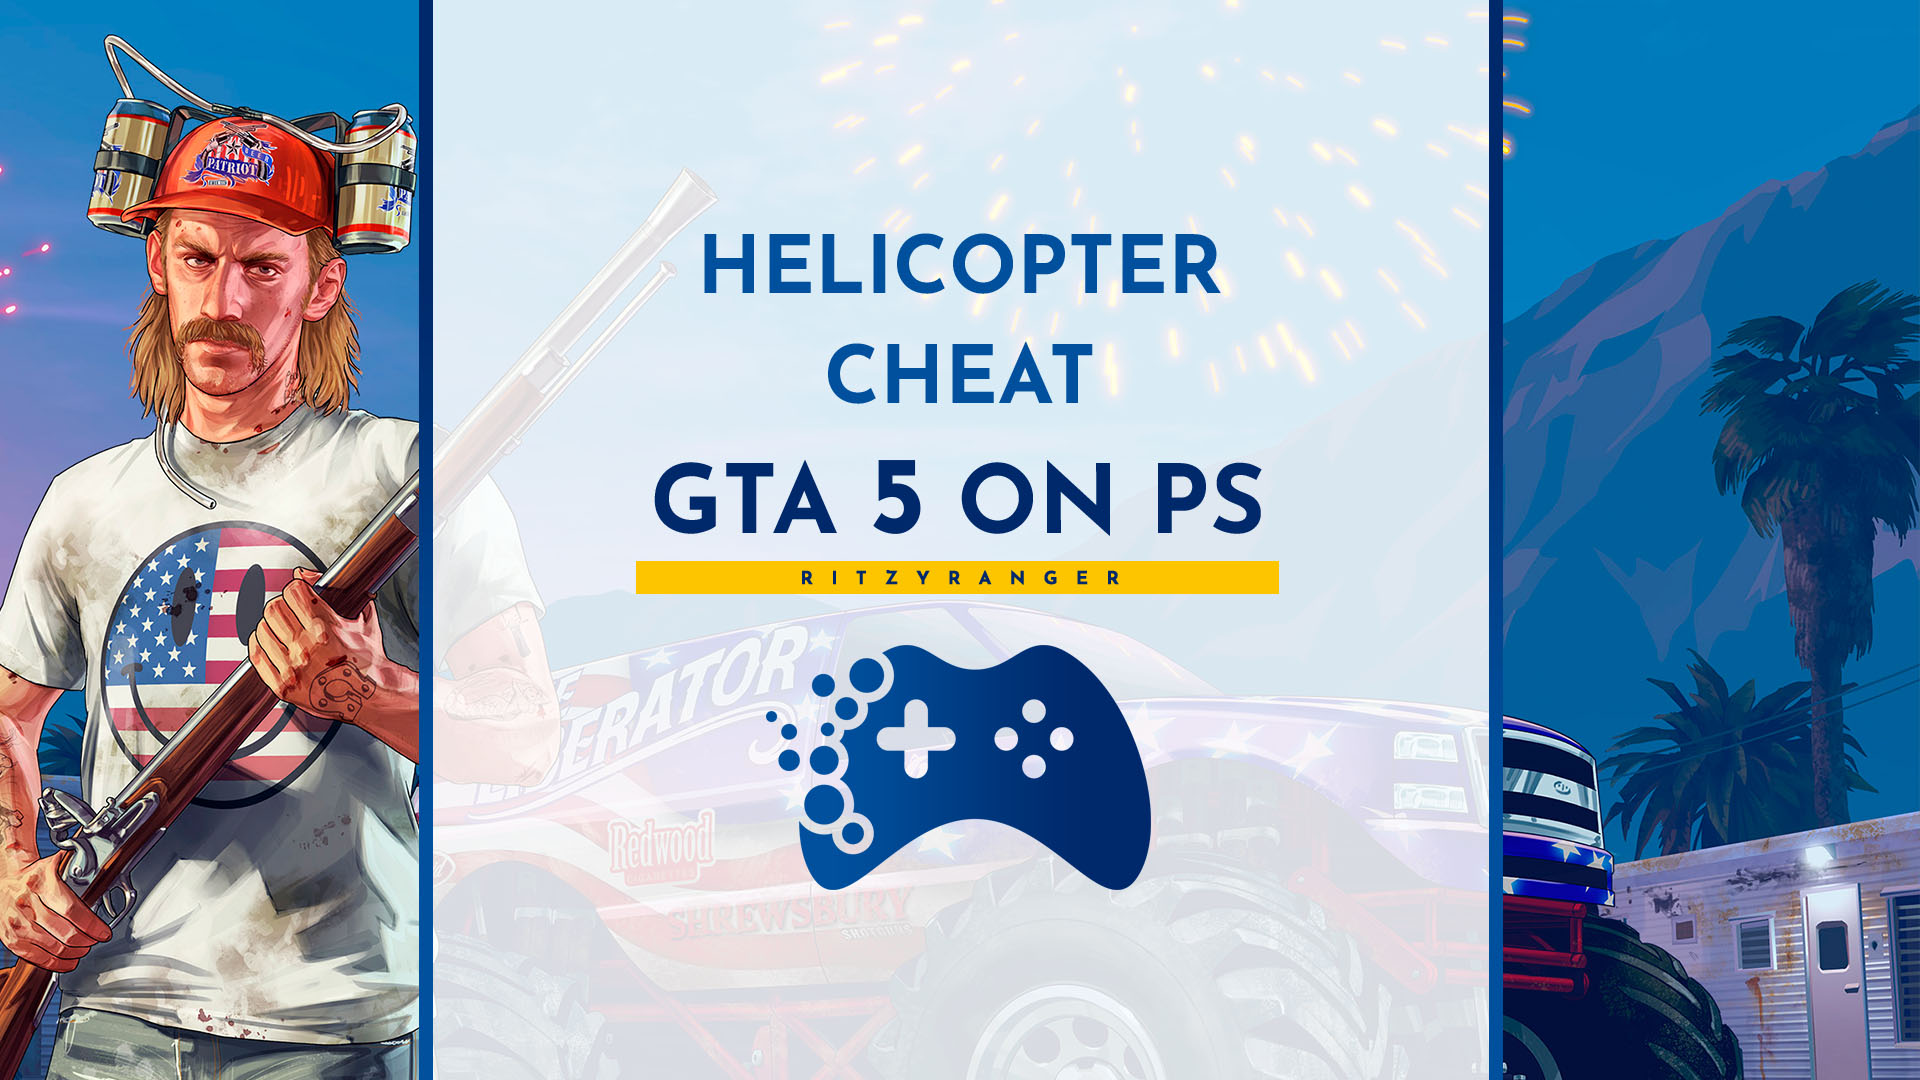 gta 5 helicopter cheat on ps